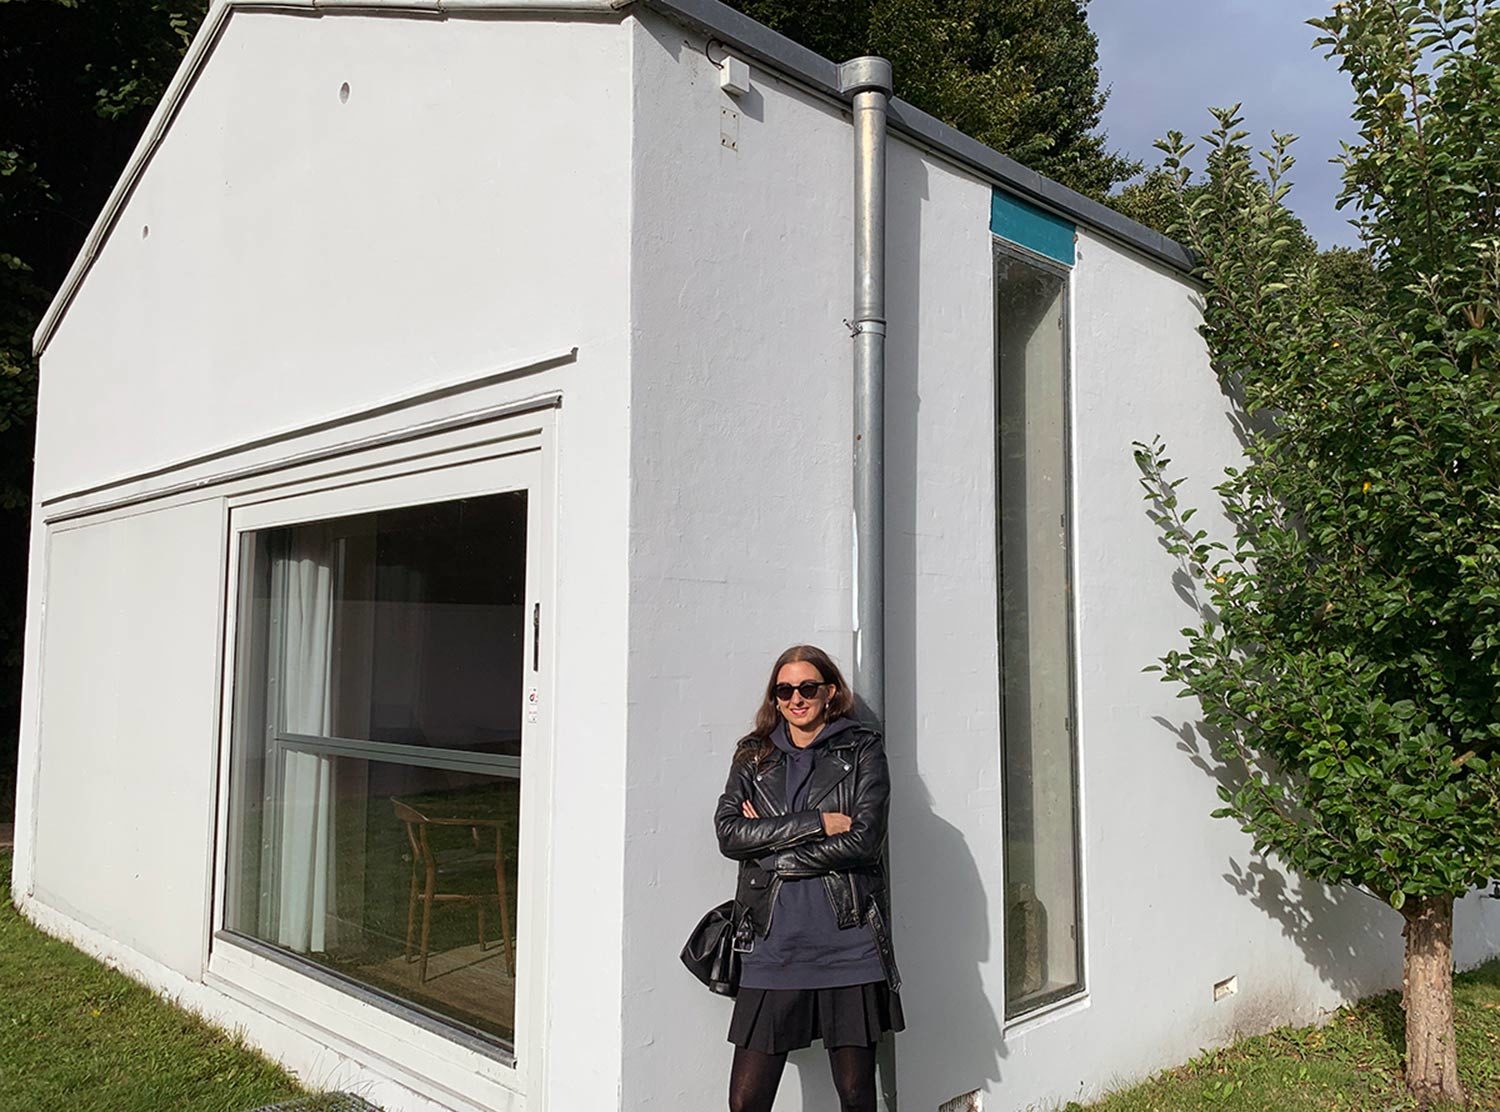 Kanalhuset Posing in front of the newly renovated house of the late architect Finn Juhl, which is now a museum